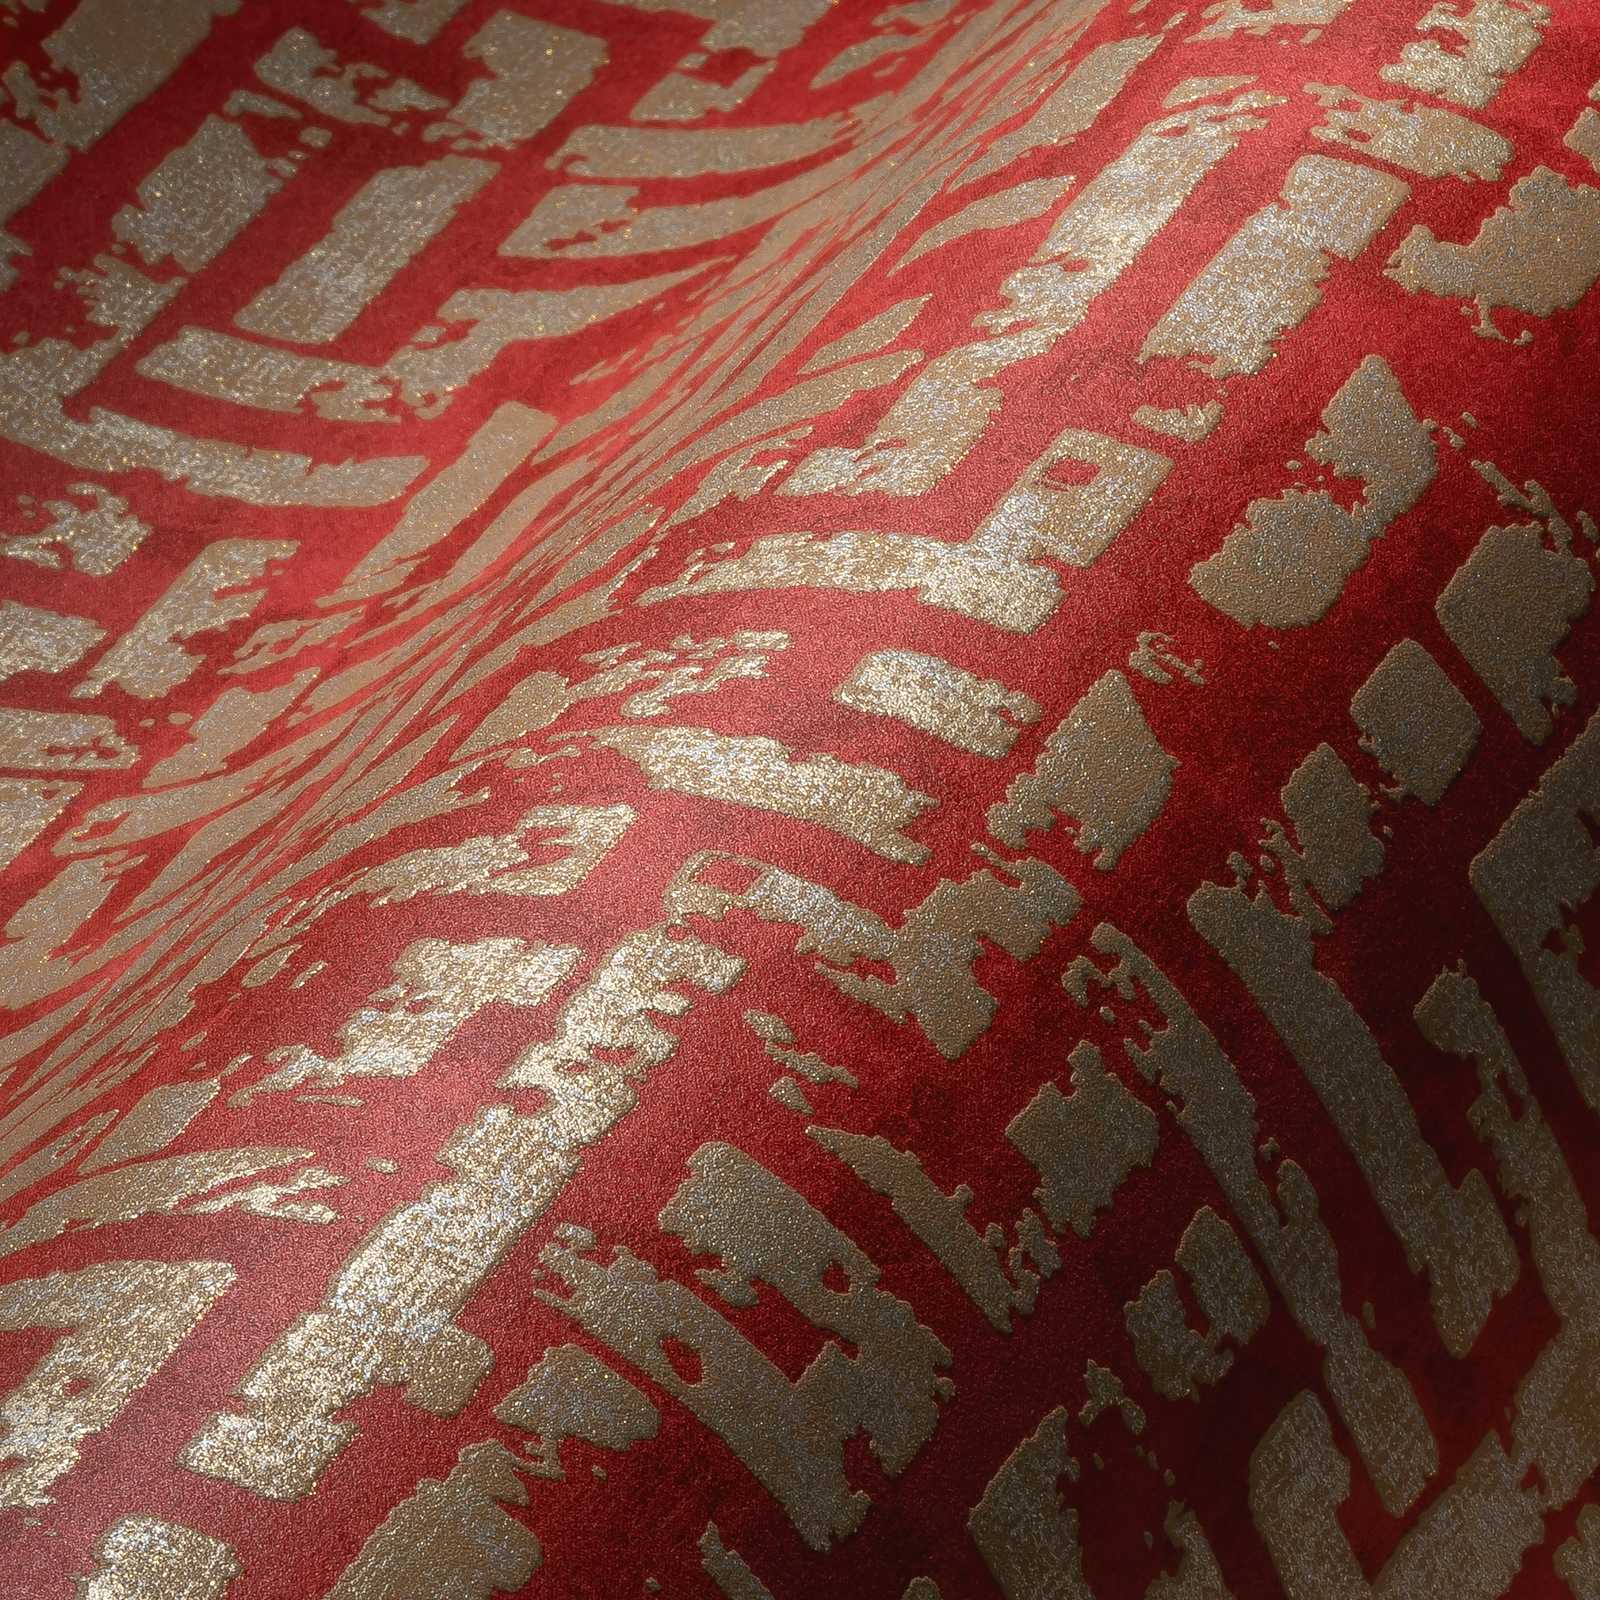             Wallpaper red-gold with graphic pattern & used look - red, metallic
        